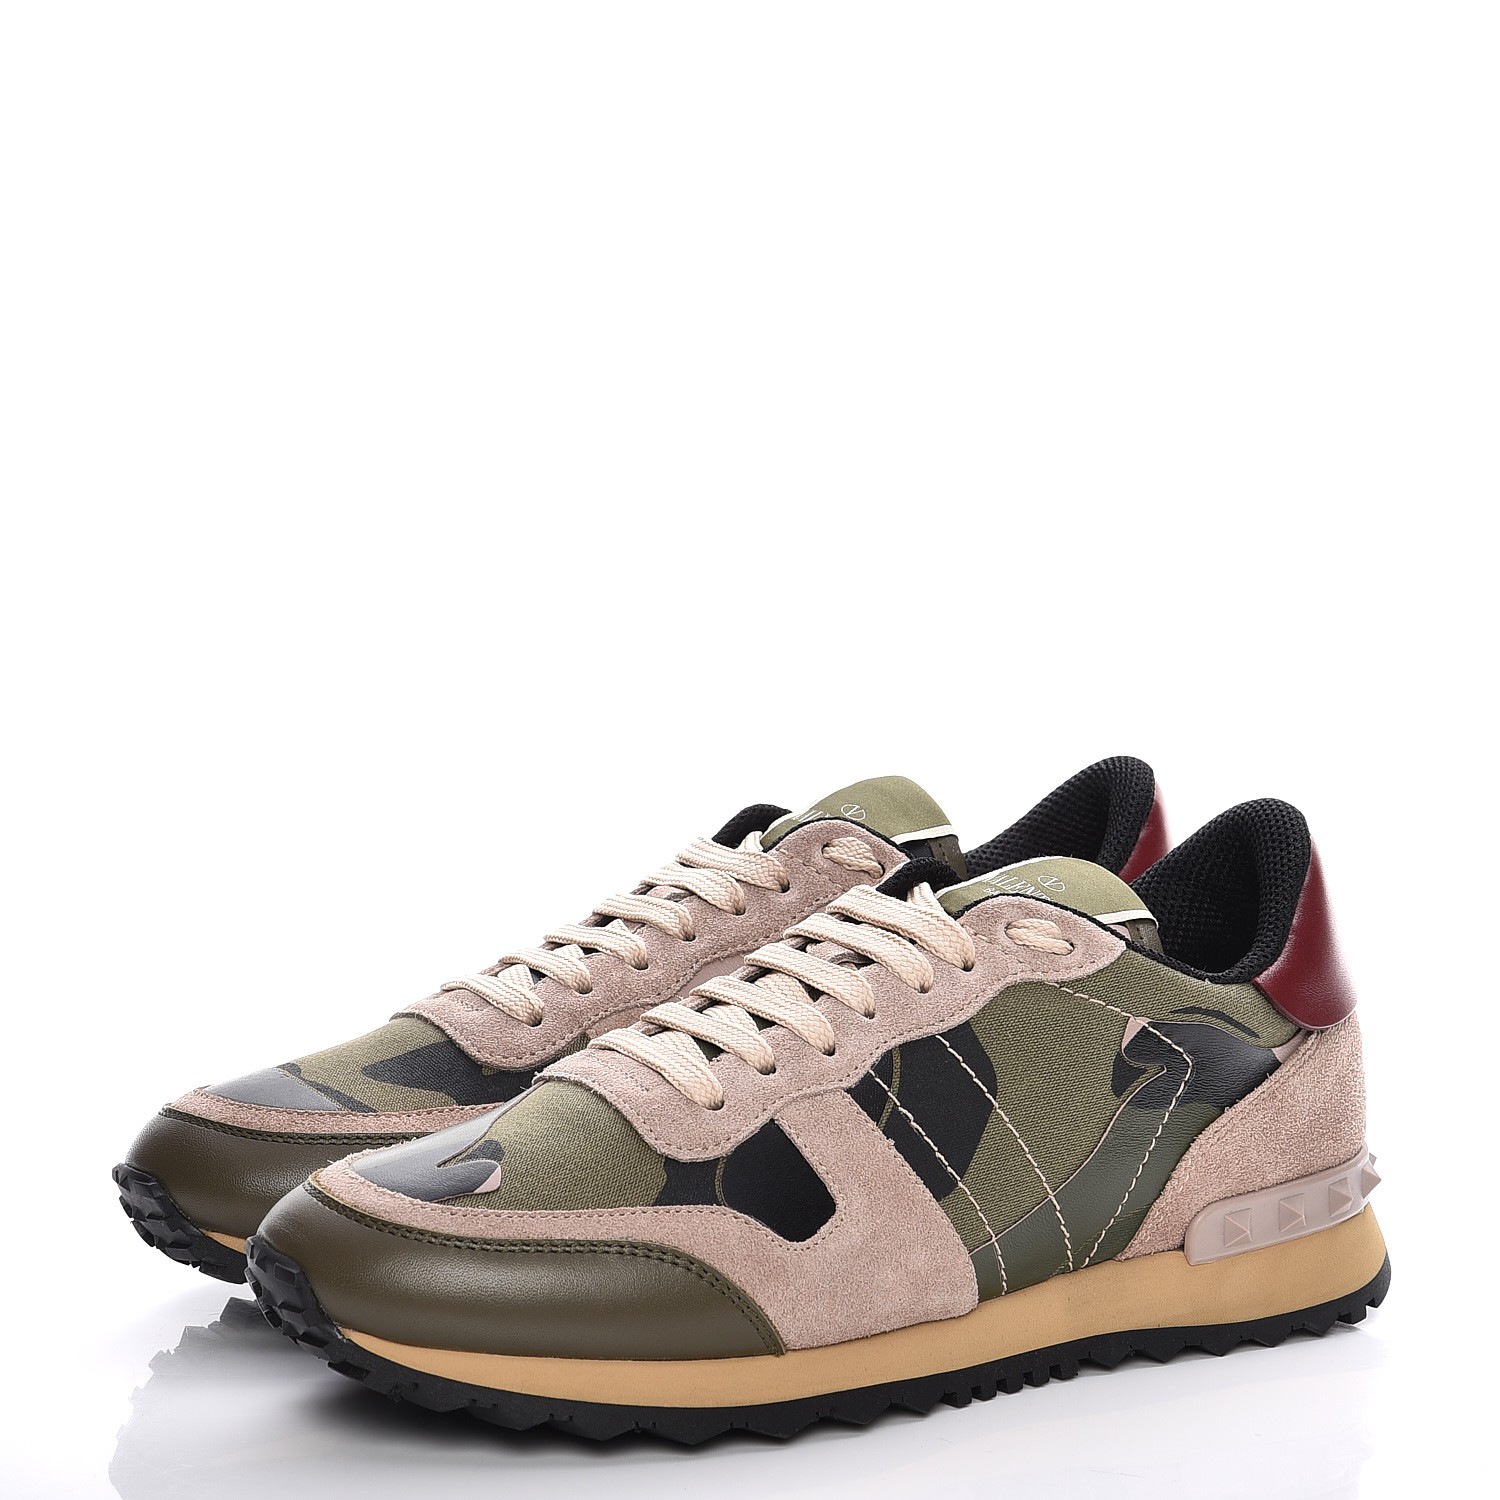 VALENTINO Calfskin Suede Camouflage Rockstud Sneakers 38 Military Green ...